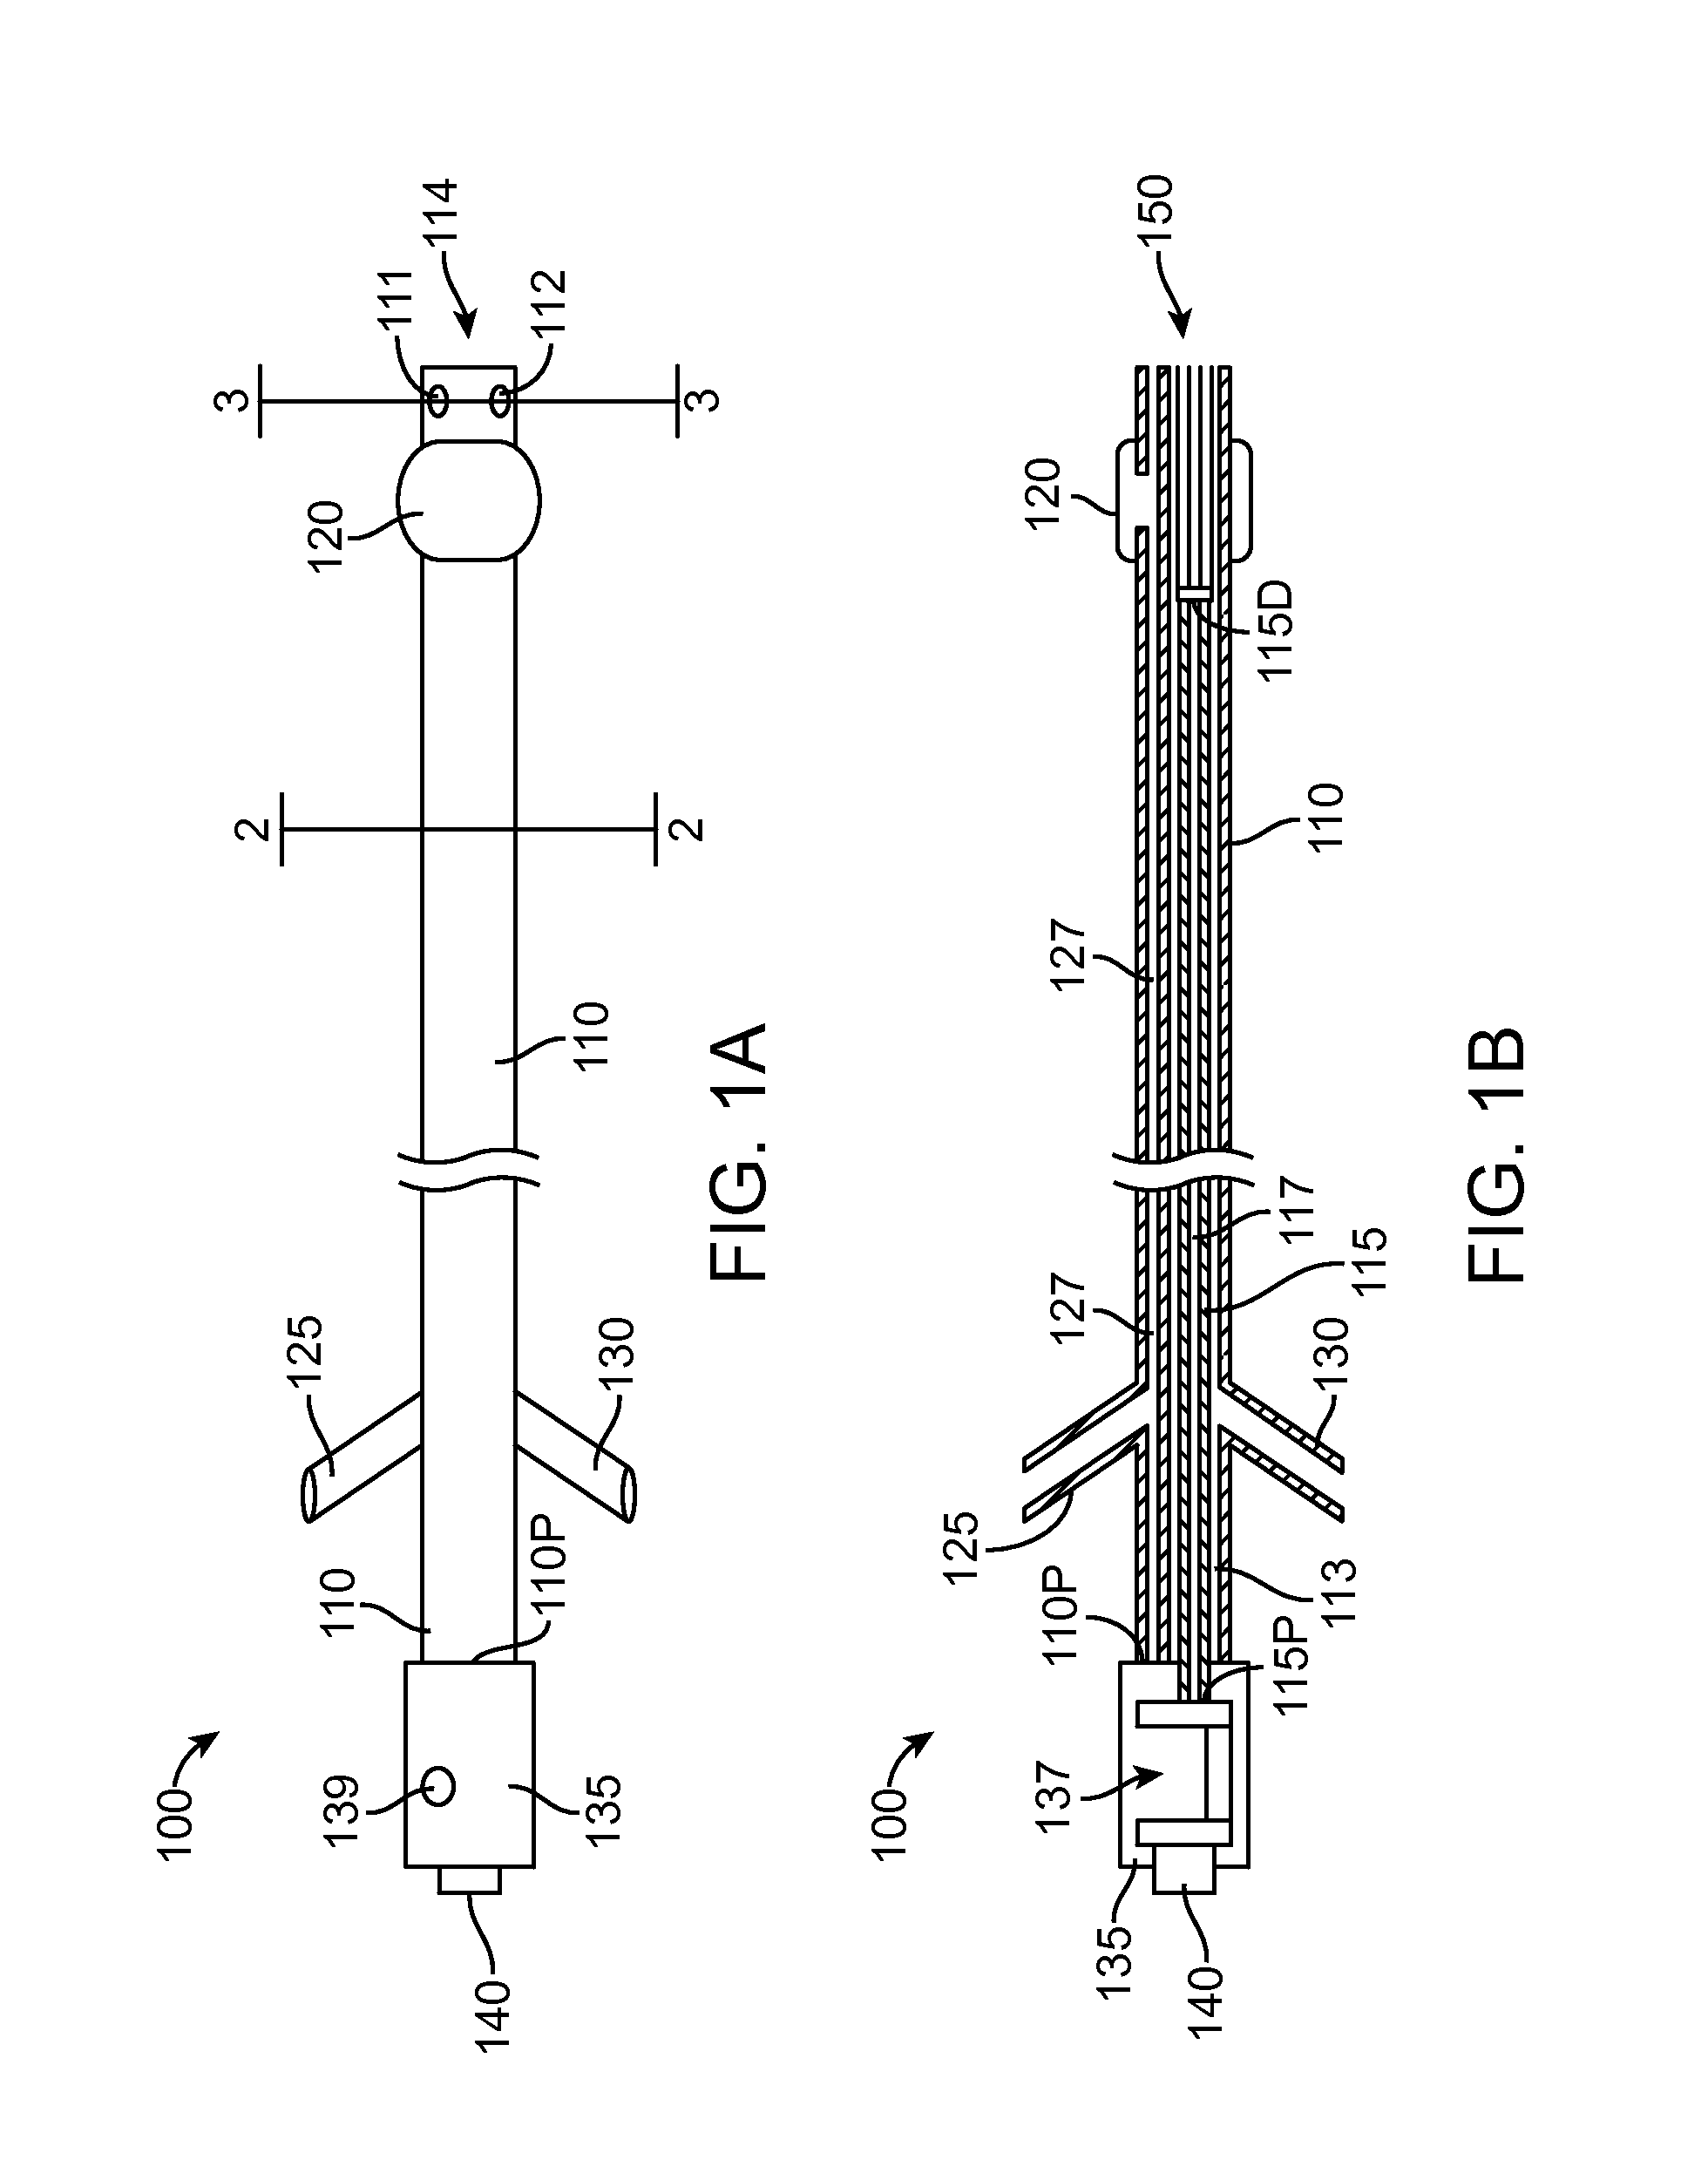 Blood clot extraction device